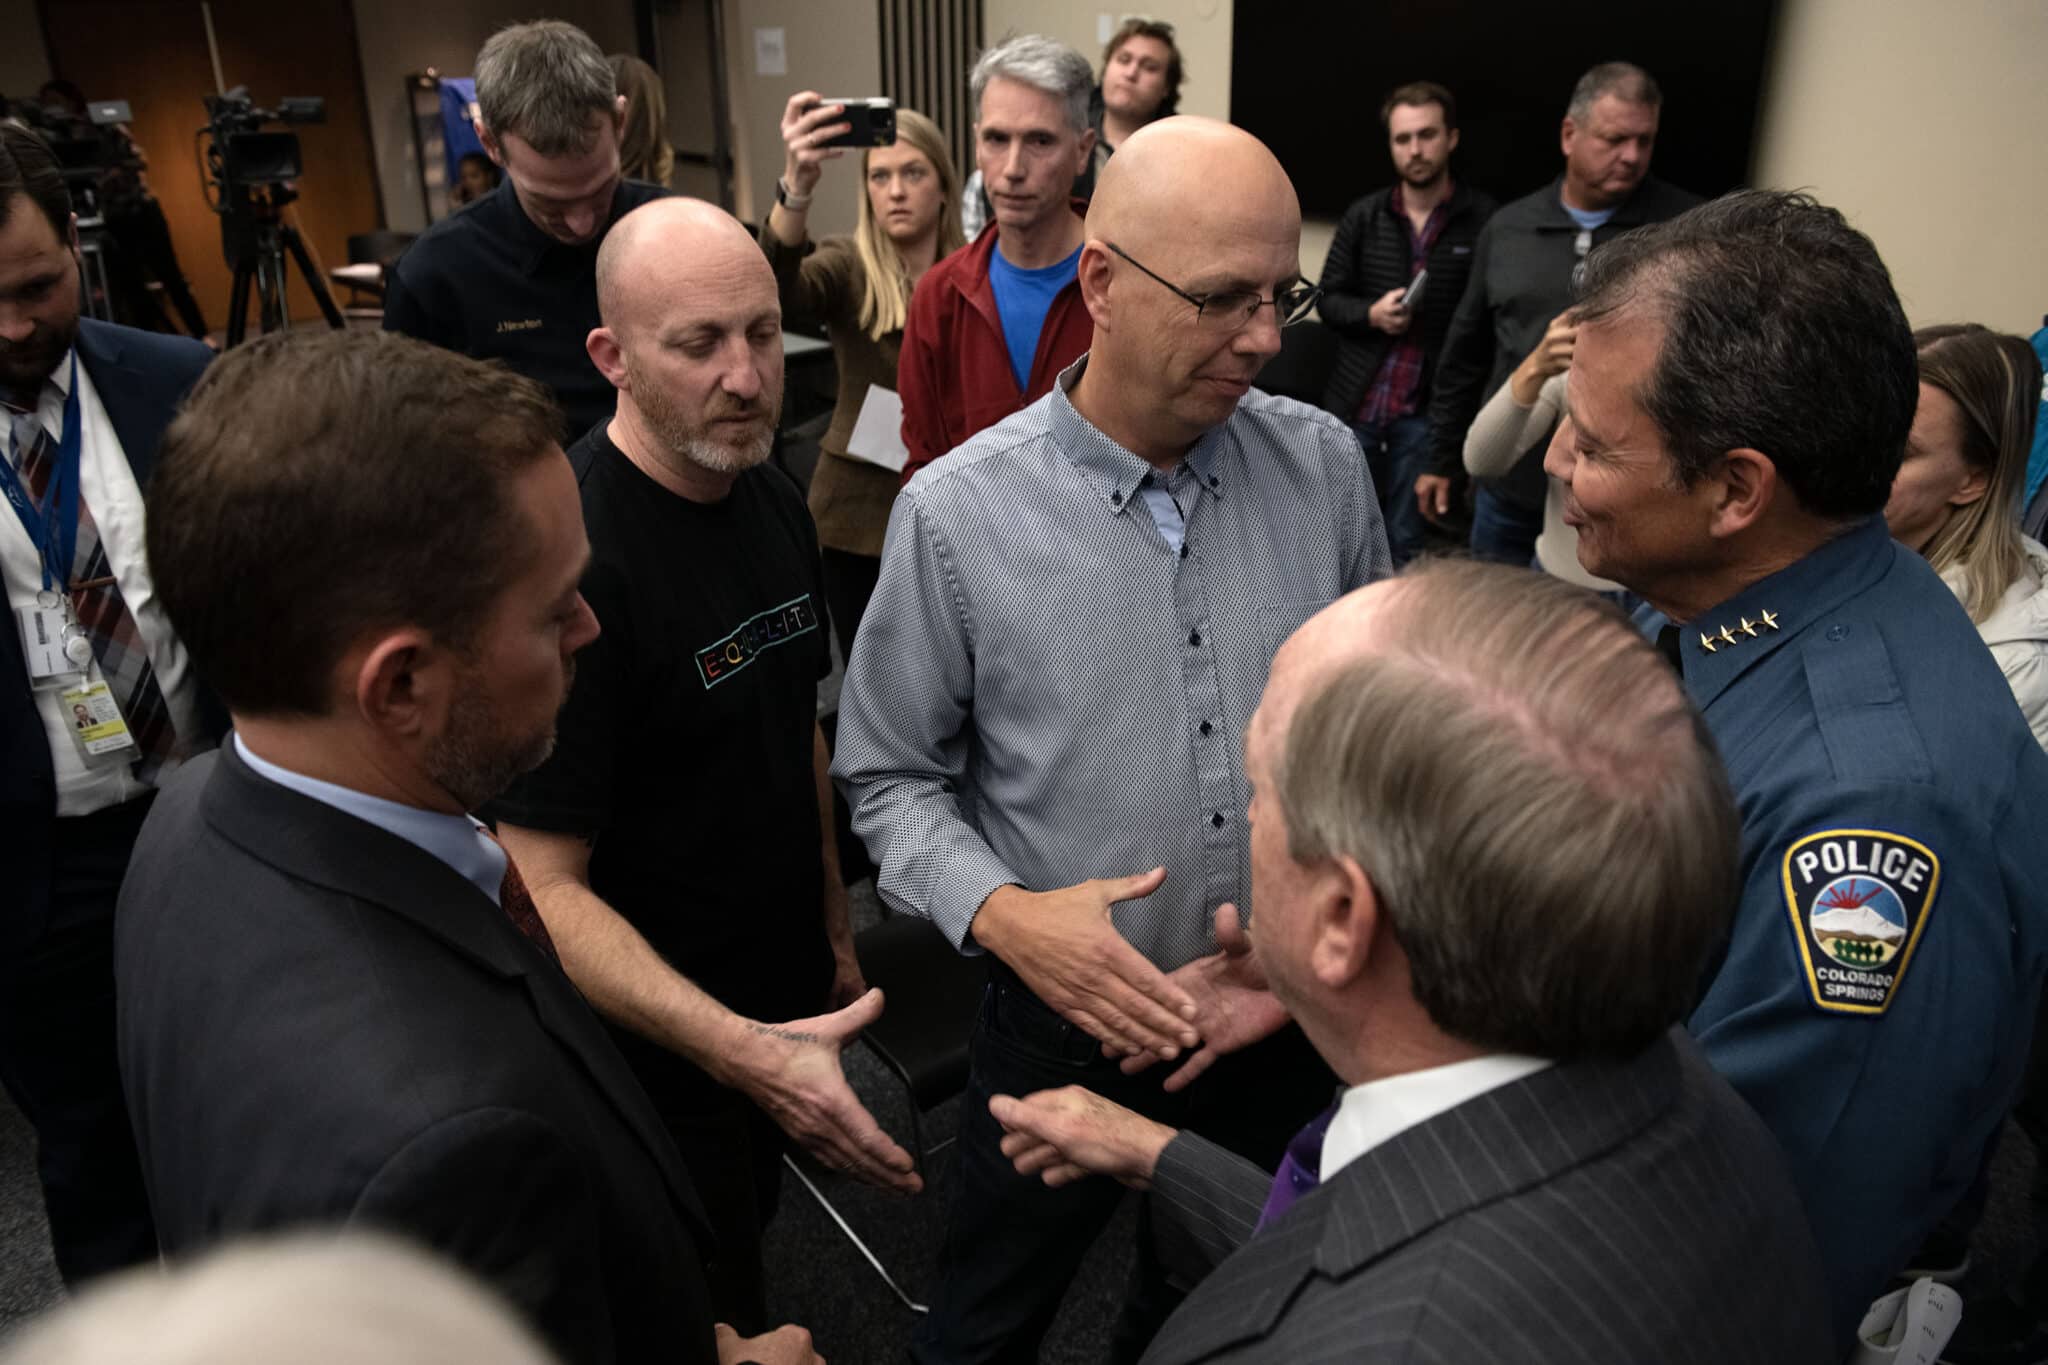 Club Q co-owners, Nic Grzecka, center left, and Matthew Haynes, center right, attend a press conference held by police in Colorado Springs.